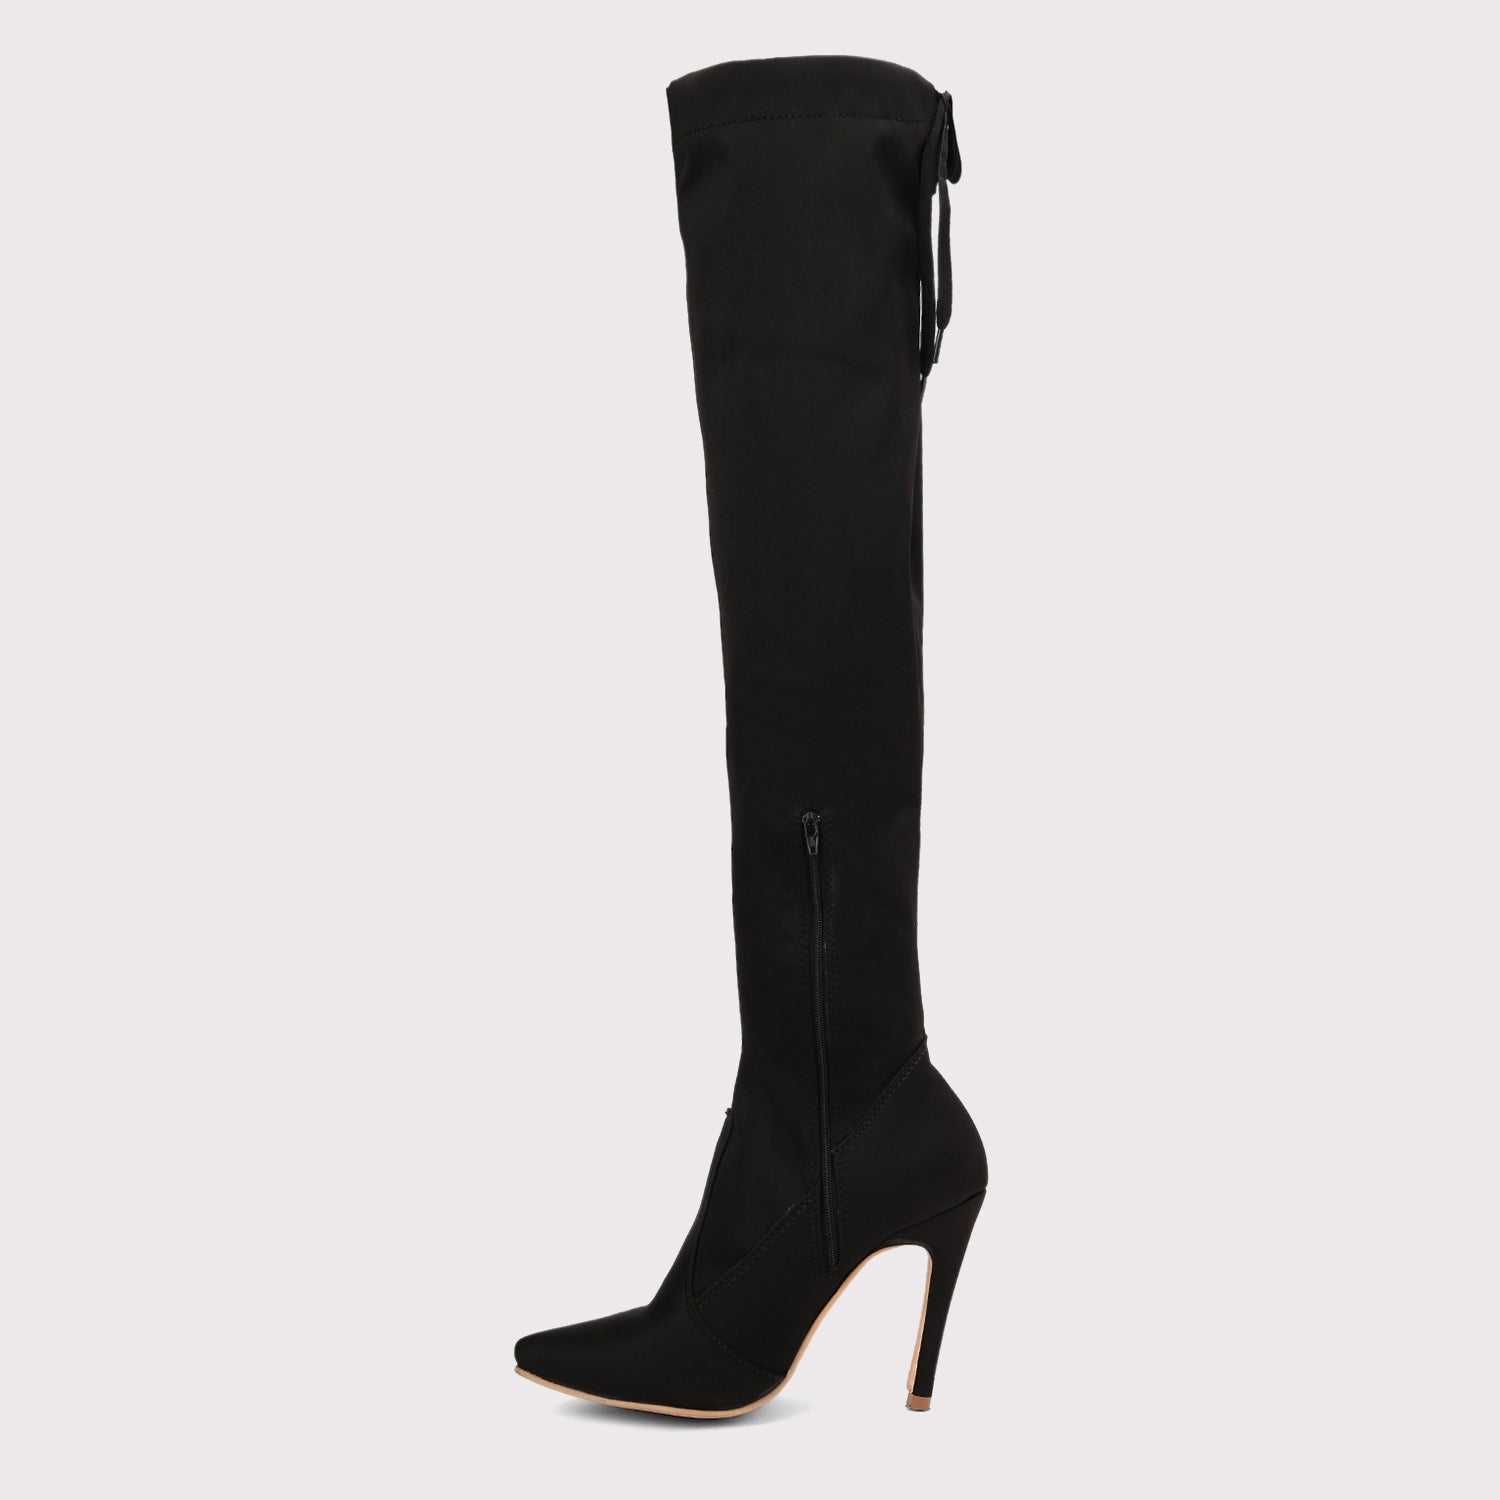 Why do ladies wear knee-high boots? - Quora